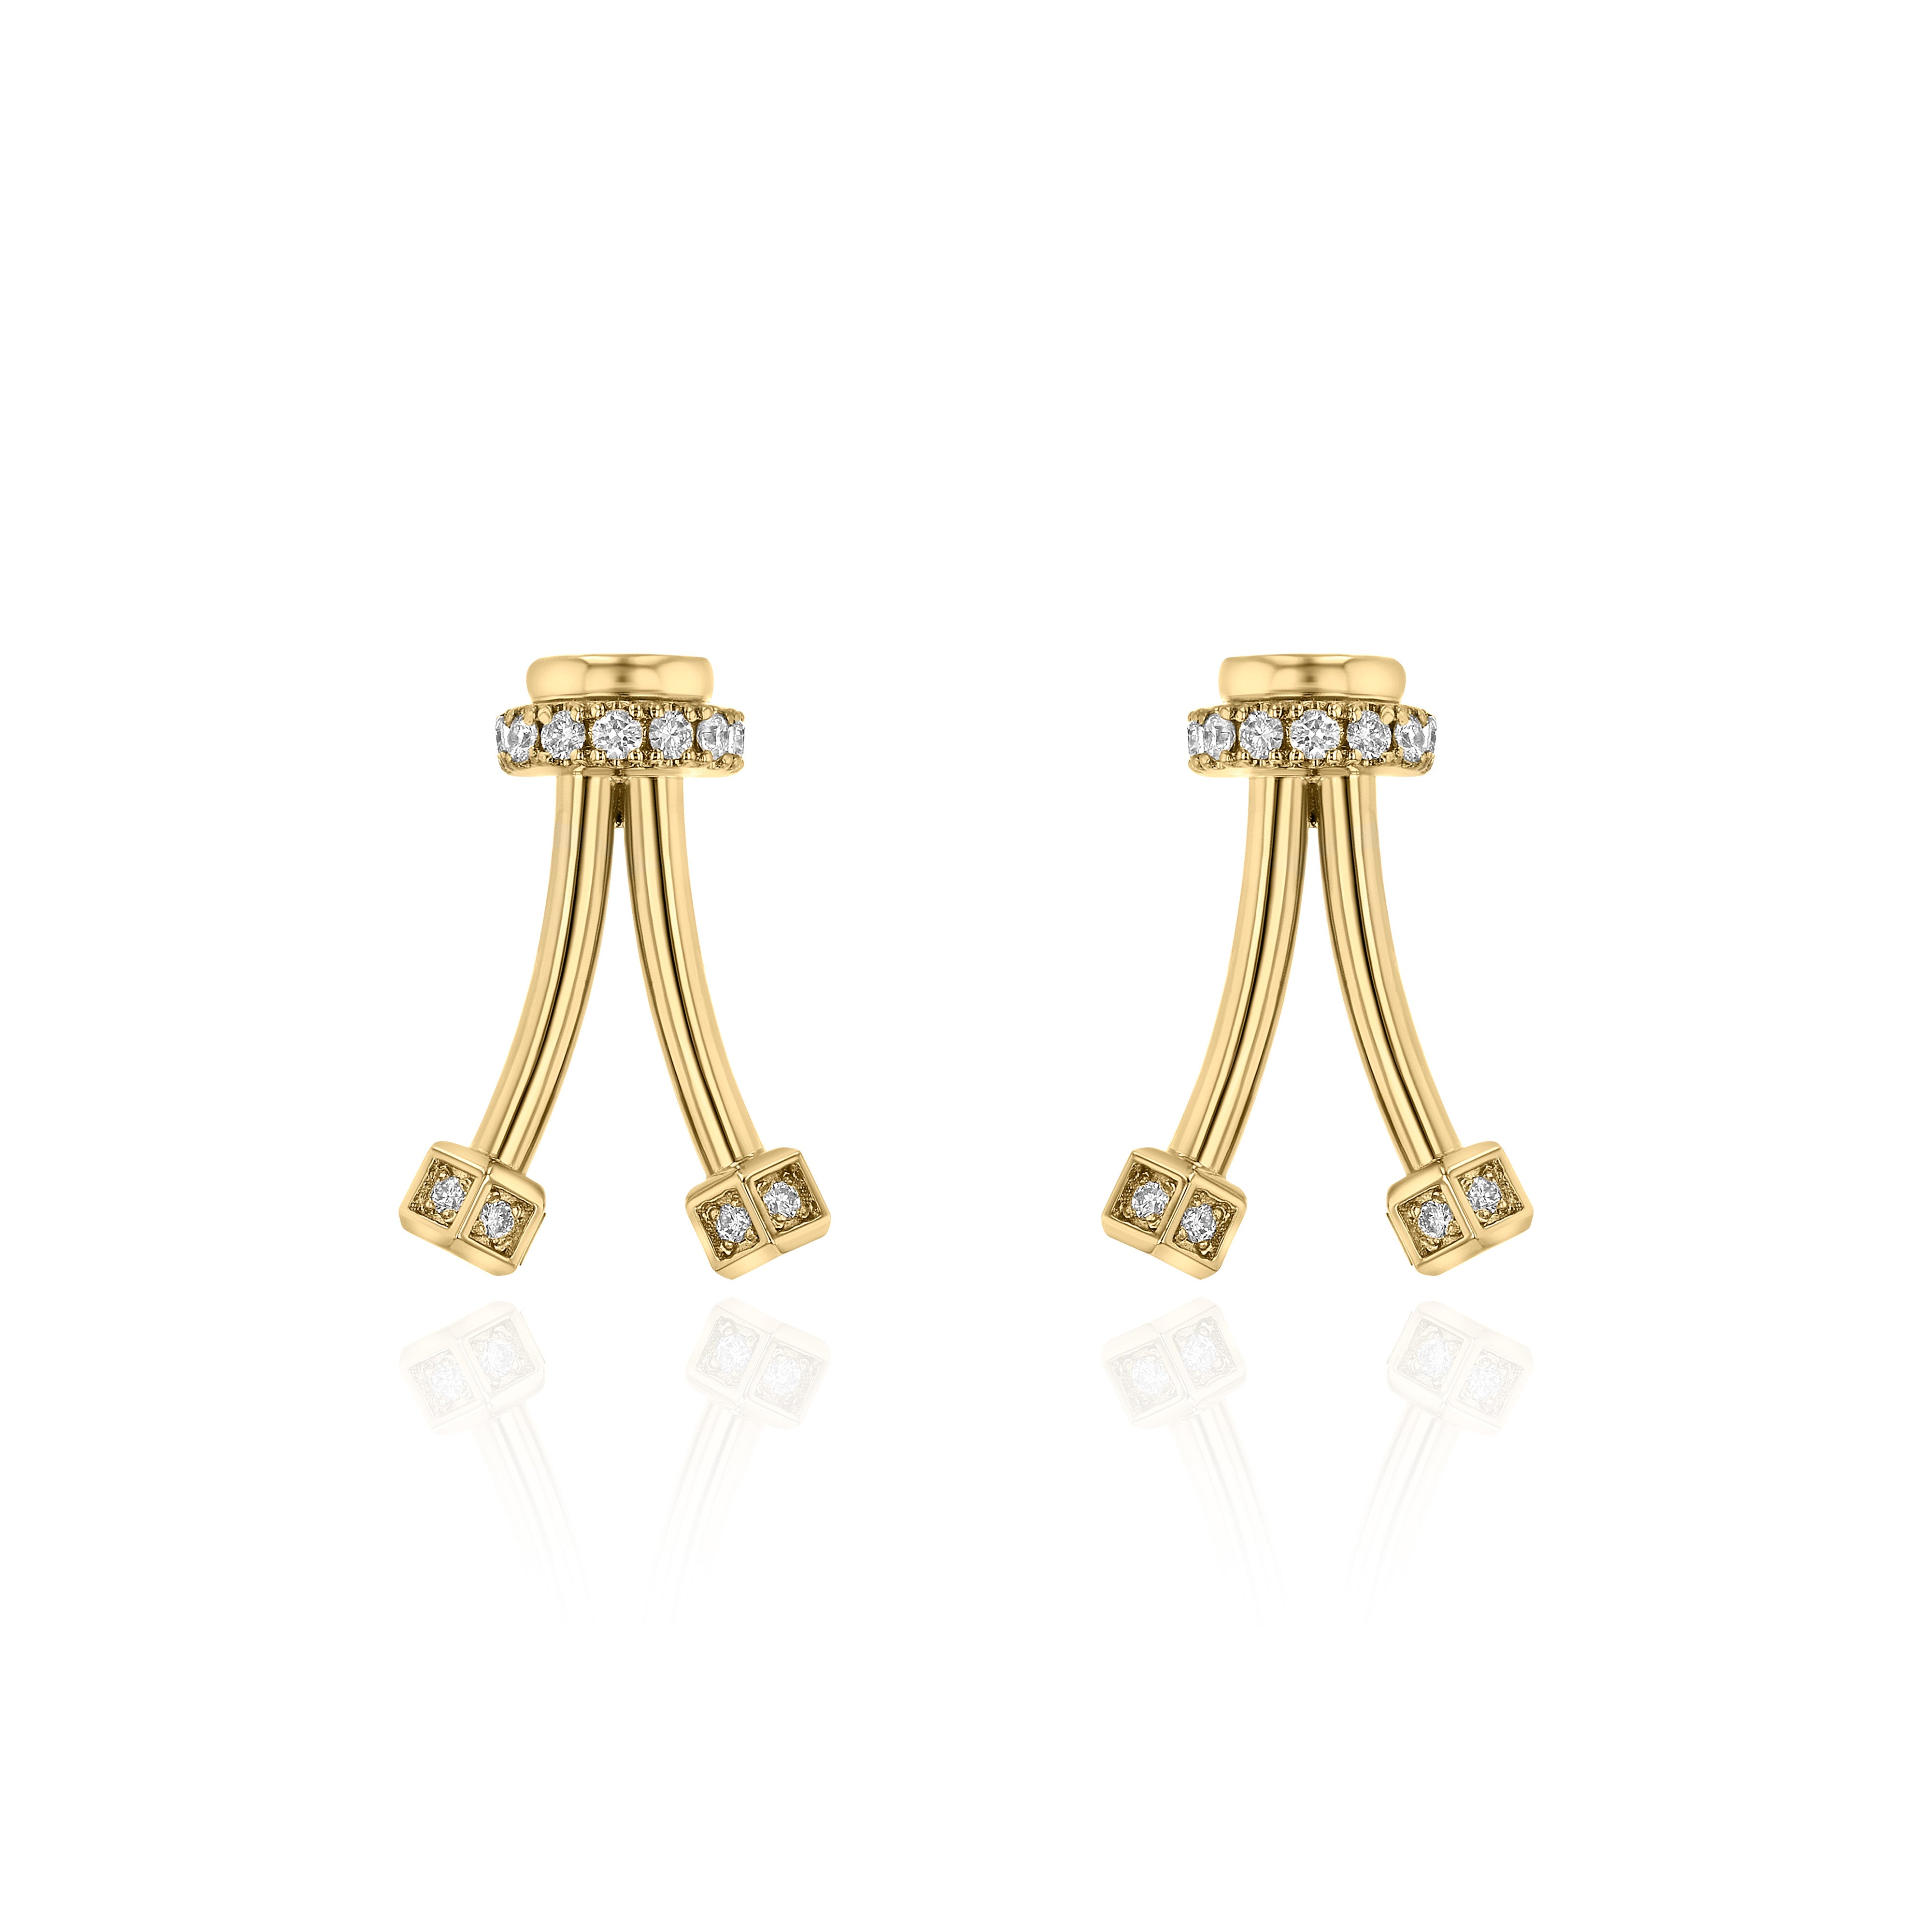 Yellow Gold upside down V shaped Earrings with Diamond encrusted ends, Small